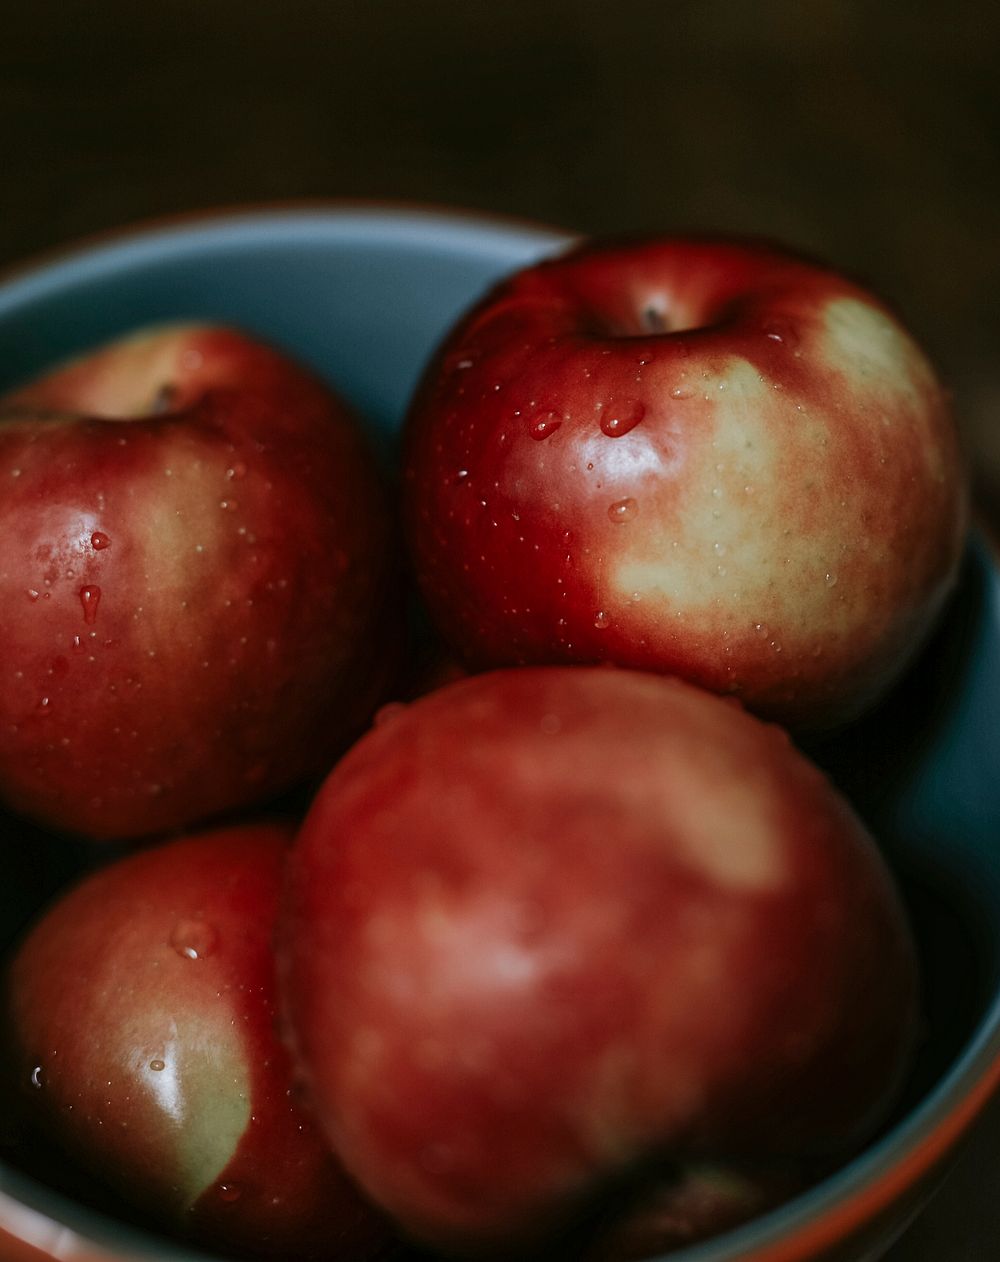 Fresh ripe apples in a bowl